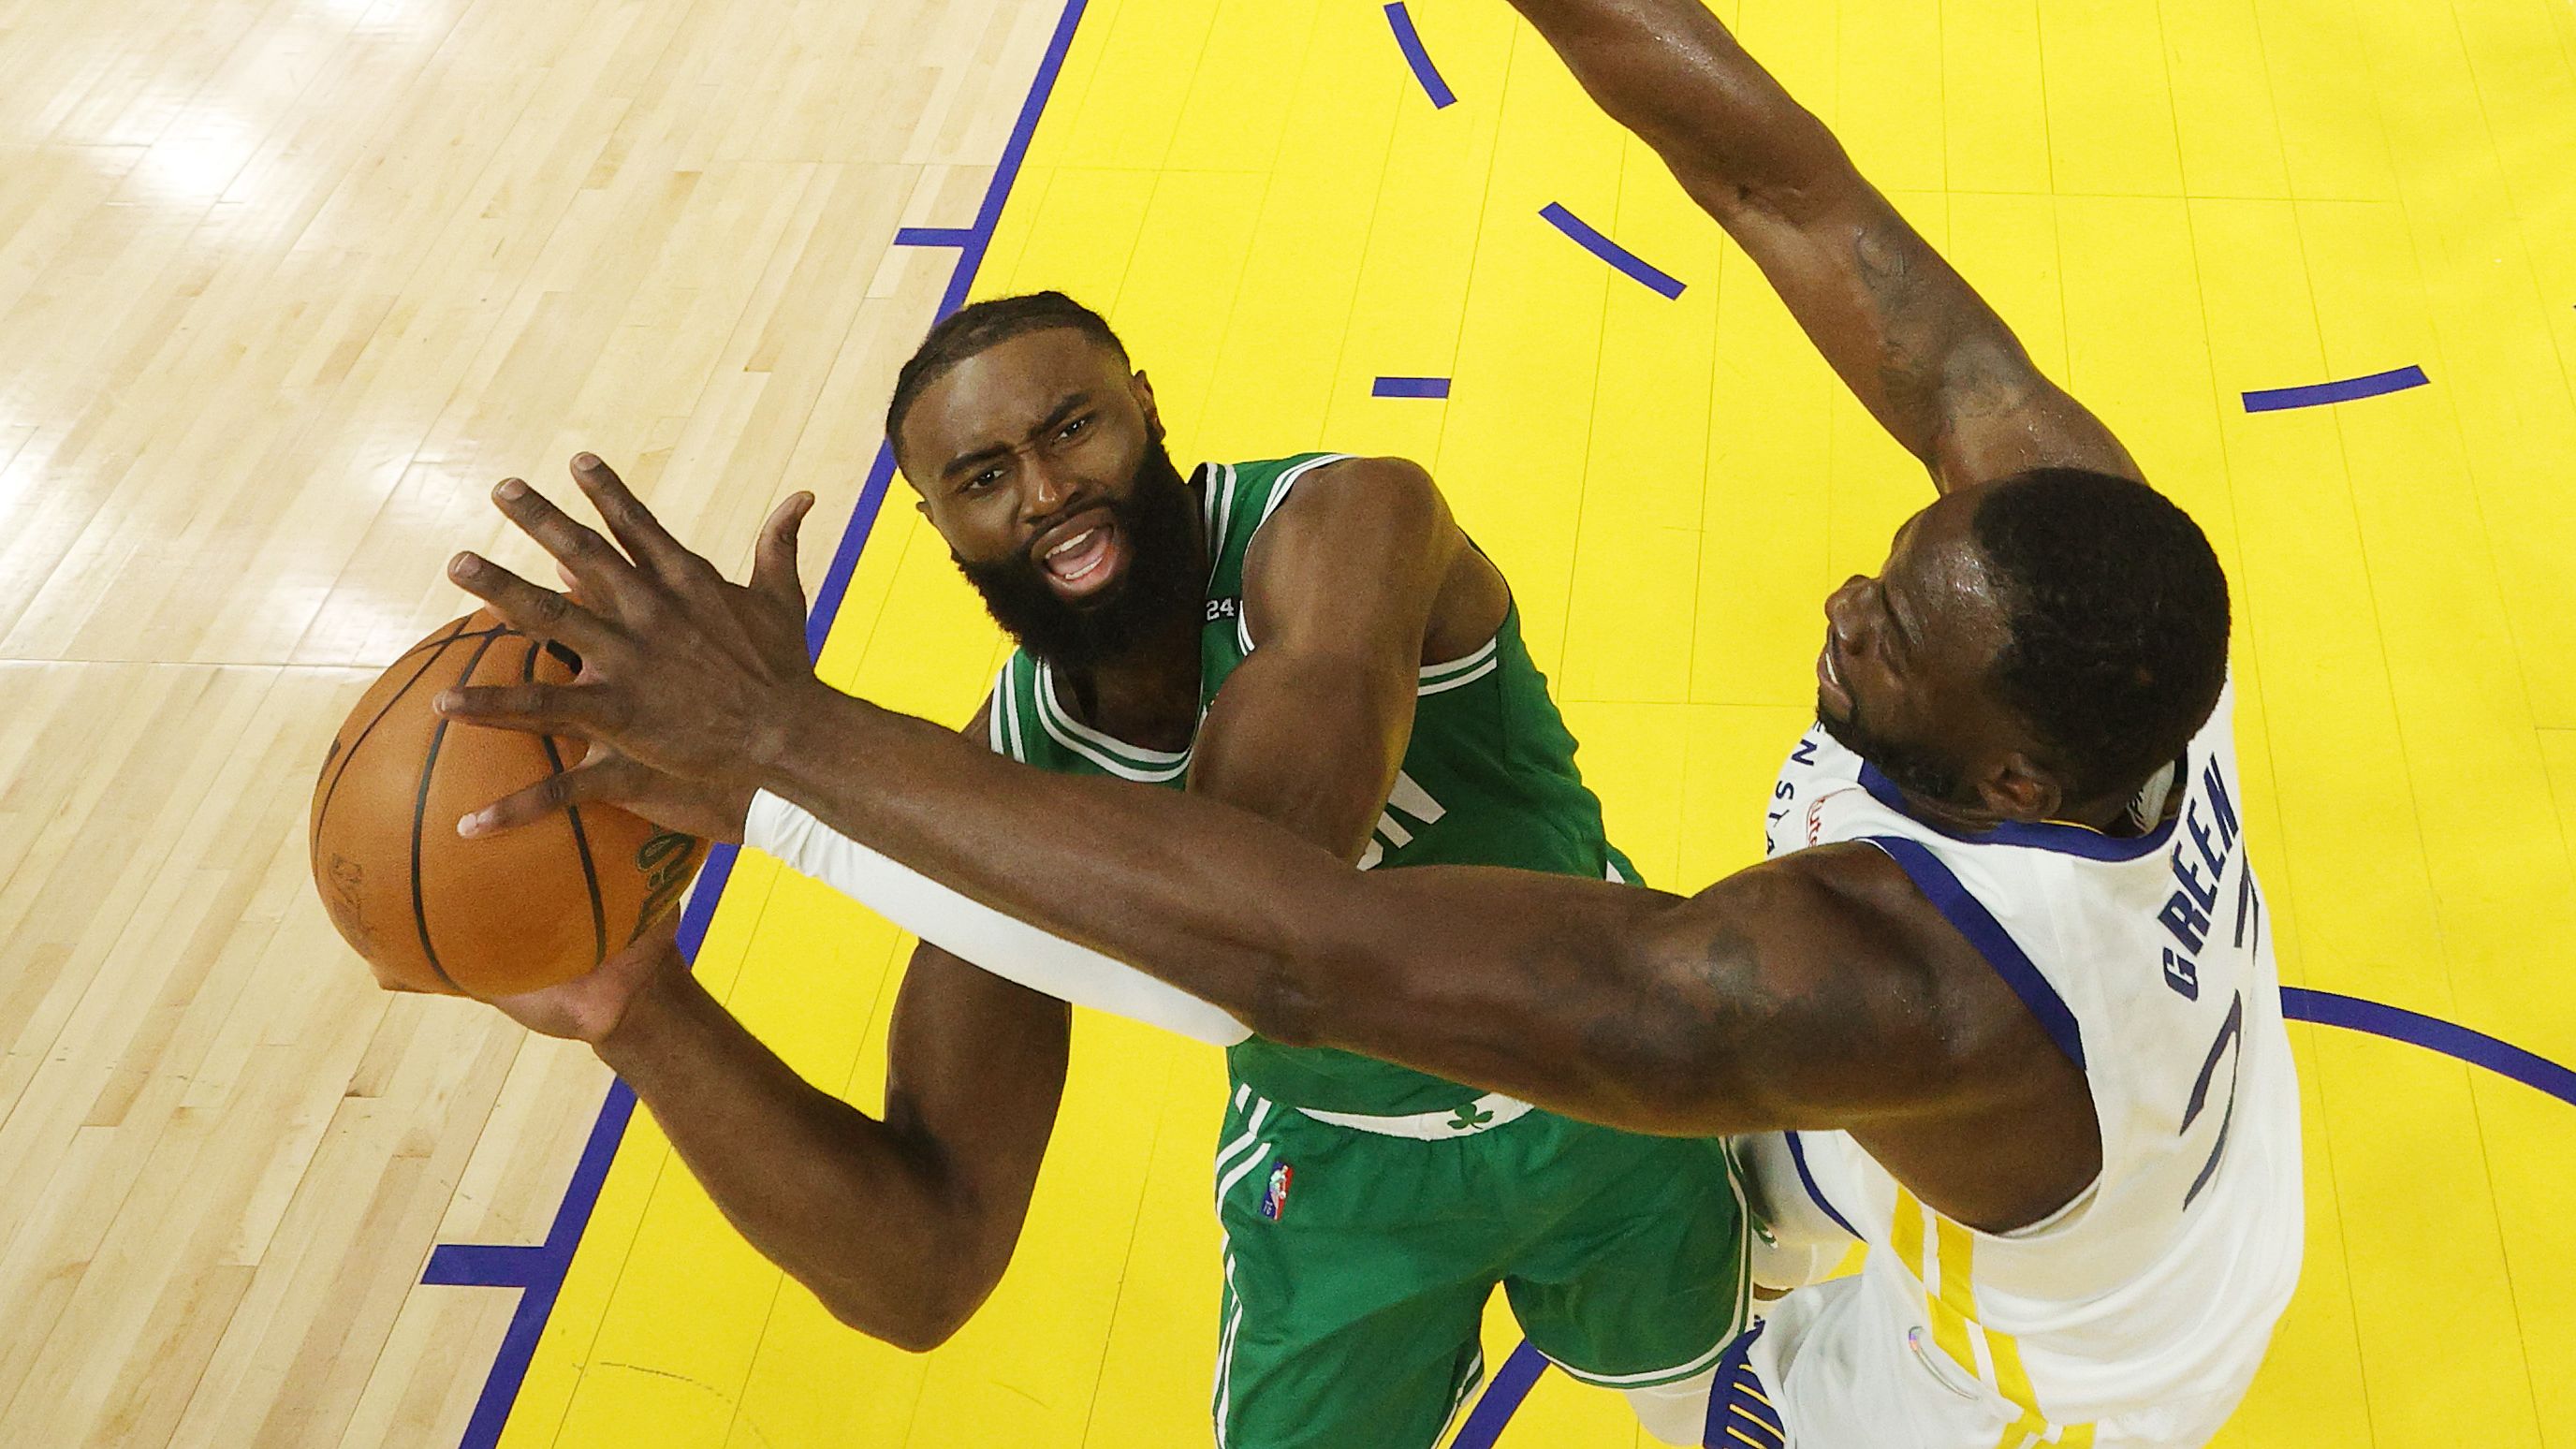 Tensions reach boiling point as Celtics routed in game two of NBA finals